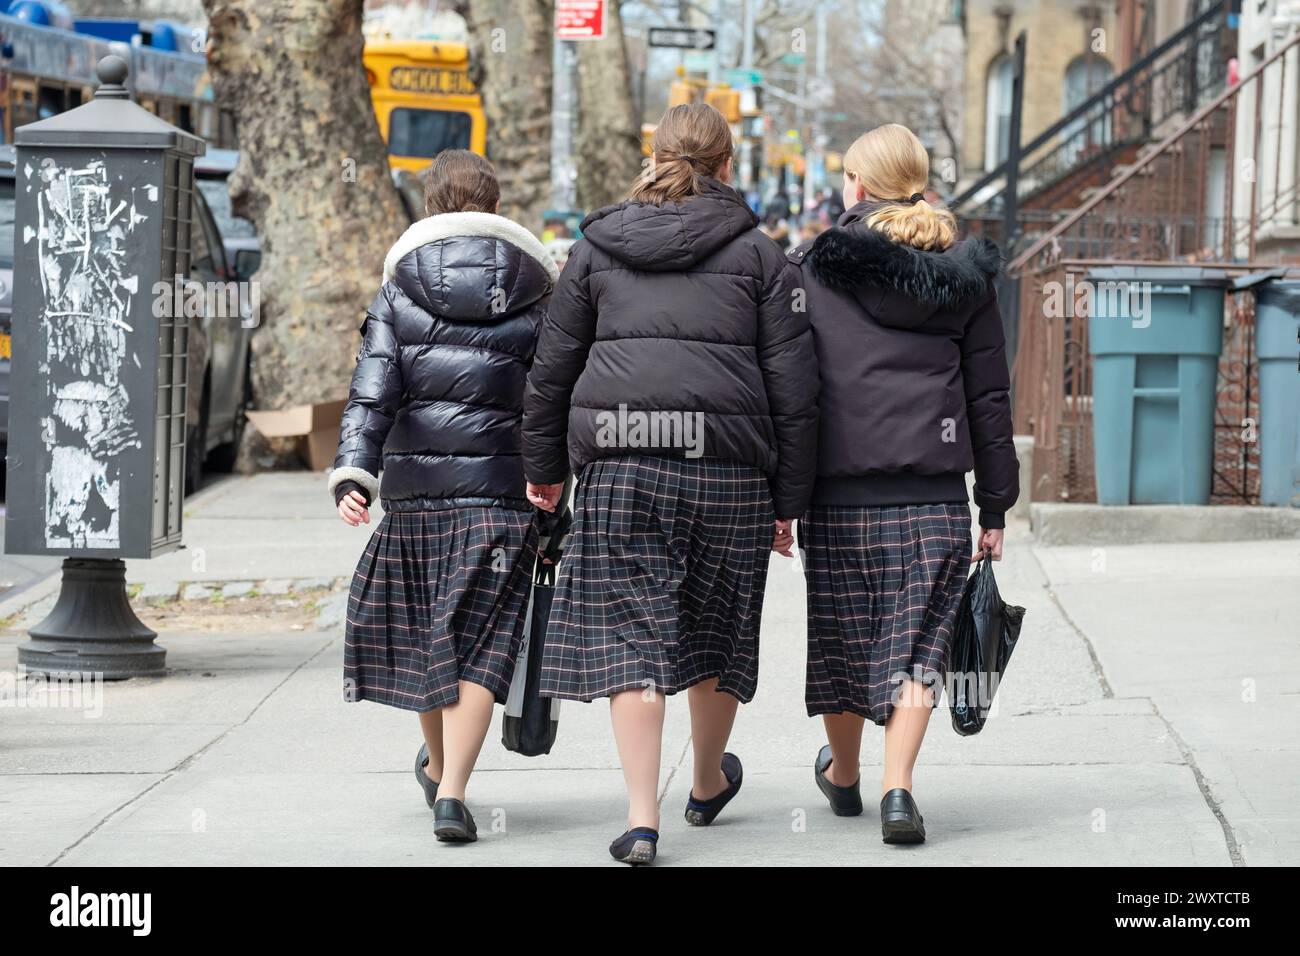 Three  orthodox Jewish girls in identical skirts walk closely together  in Brooklyn, New York. They are classmates in school uniforms. Stock Photo